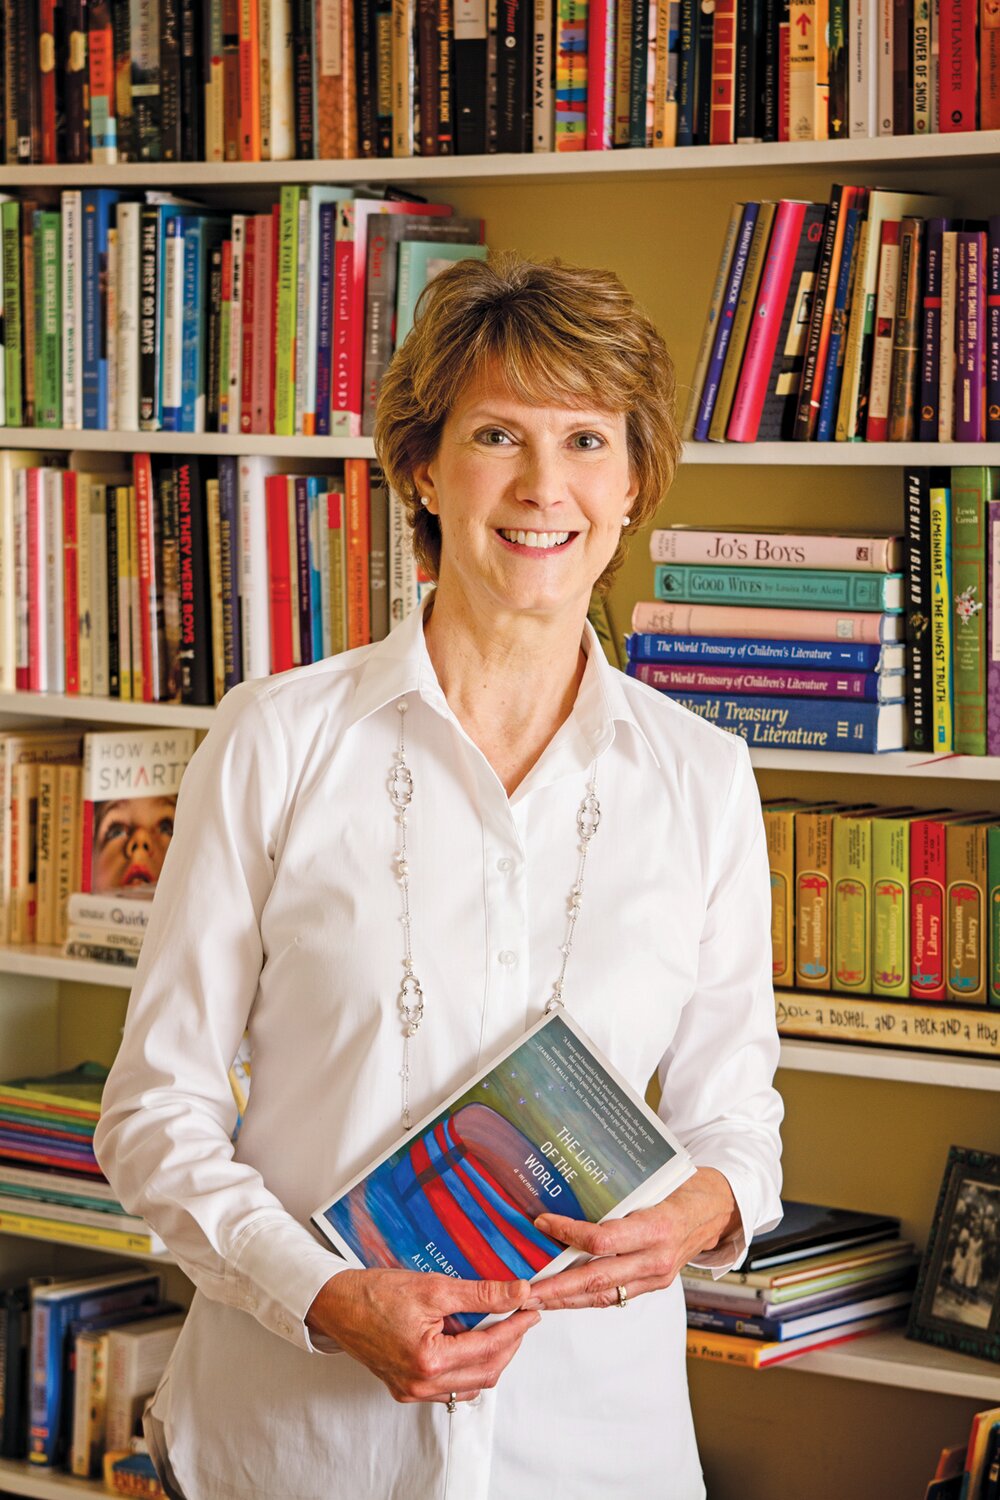 Glenda Childs has owned the Doylestown Bookshop with her
husband, Allen, since 2012.